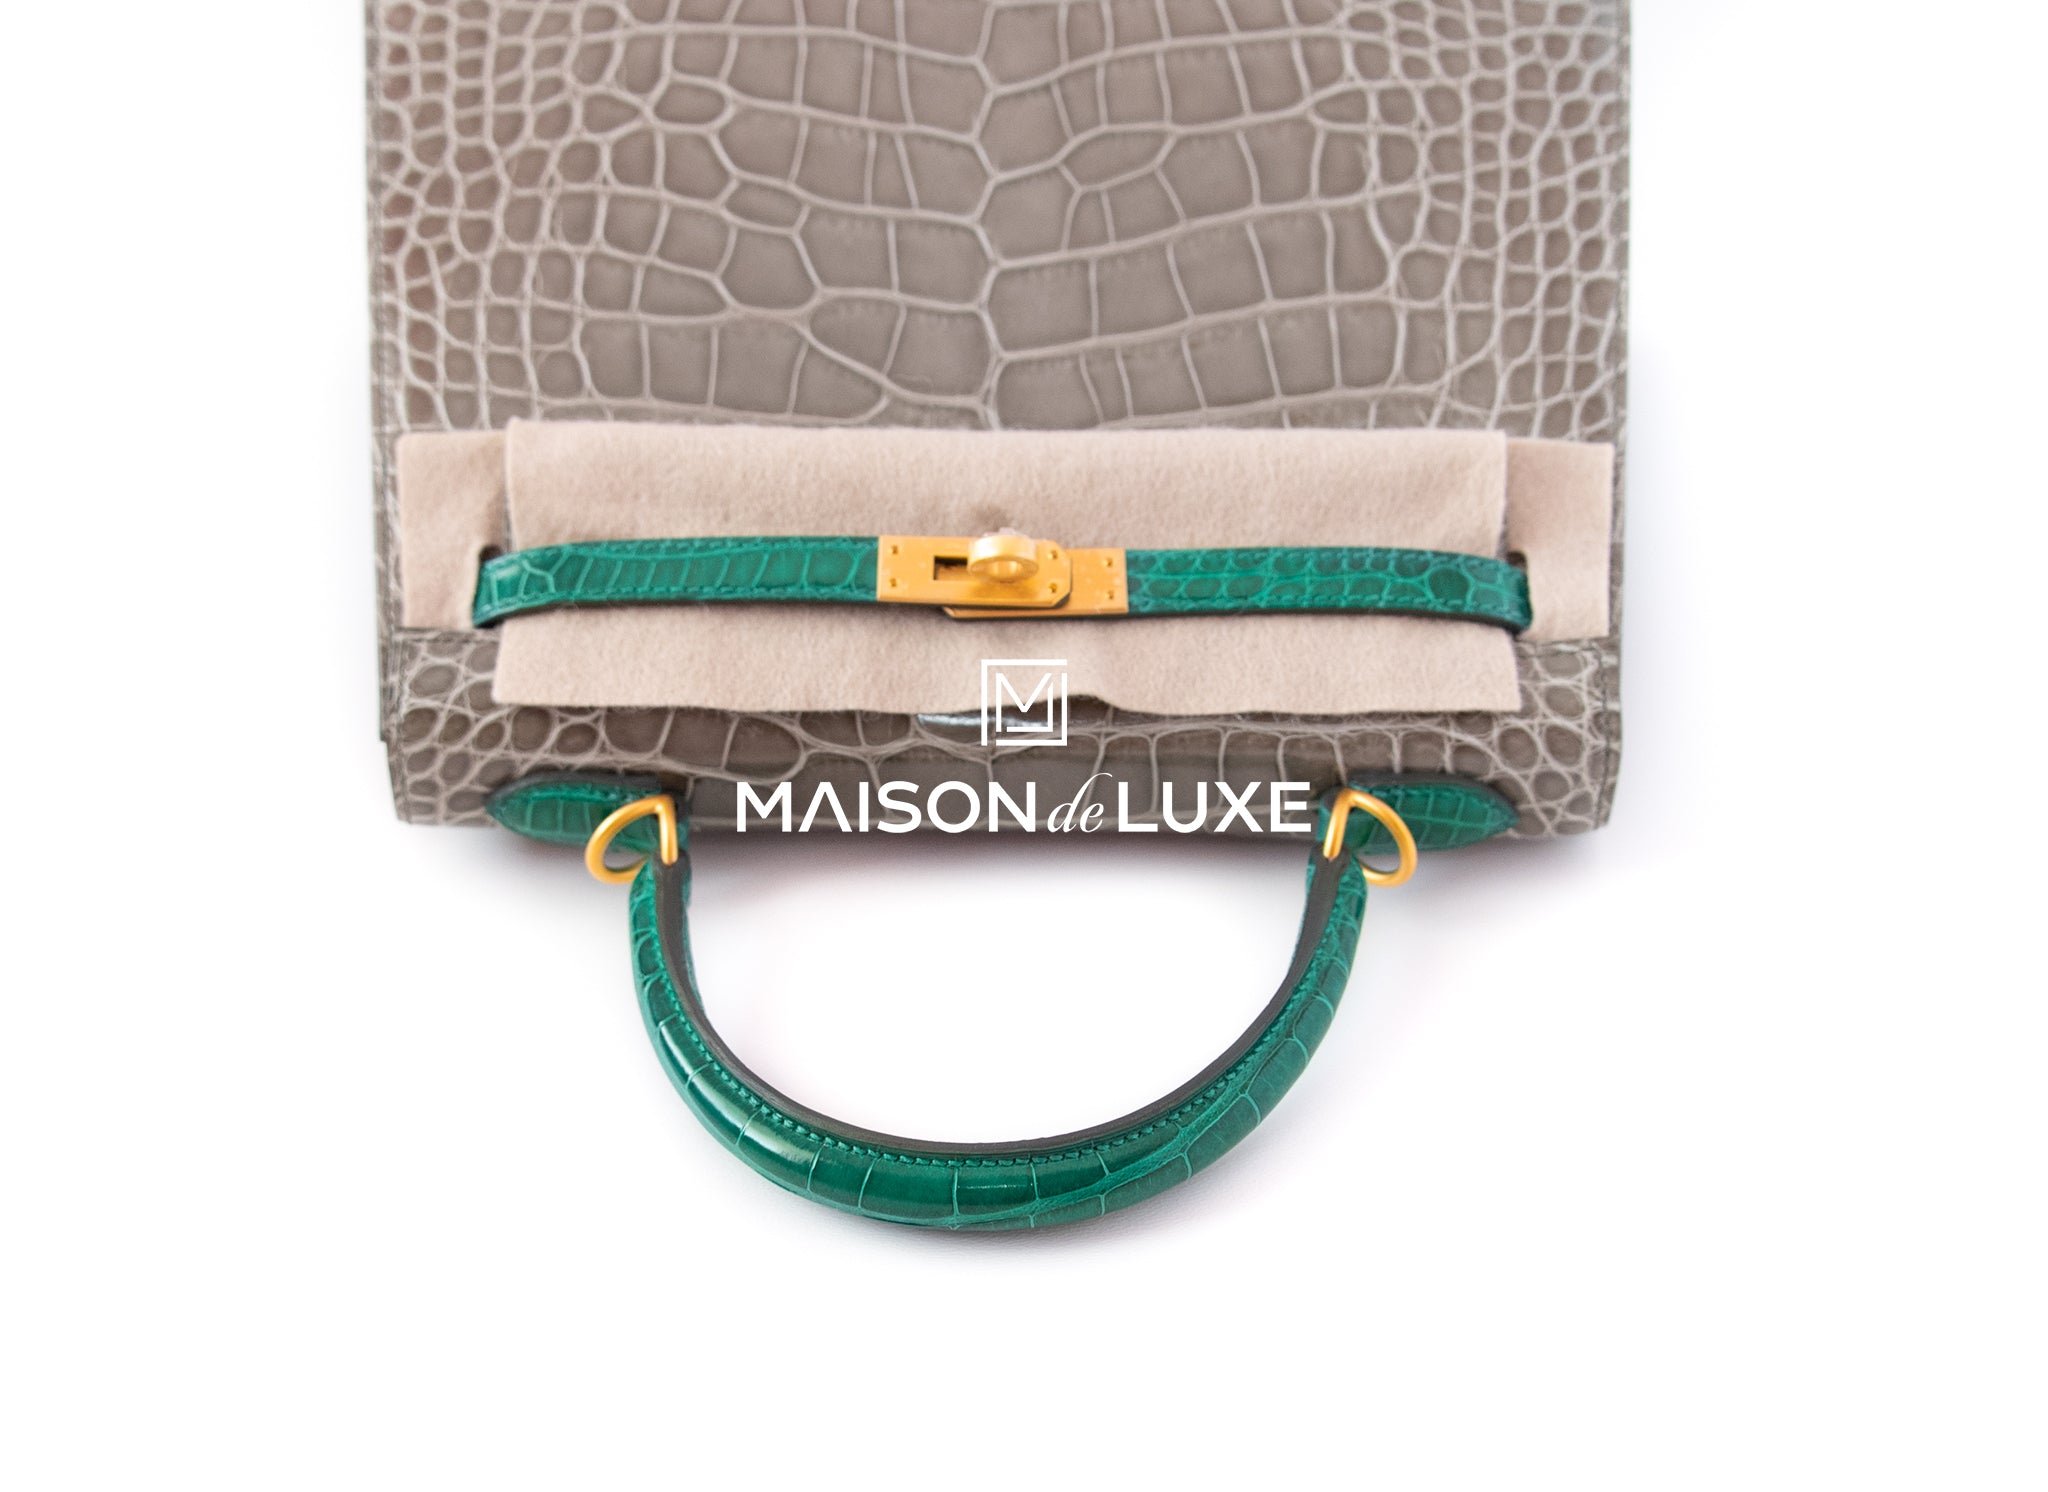 Hermes HSS Kelly Sellier 20 Gris Tourterelle and Beton Ostrich – Madison  Avenue Couture